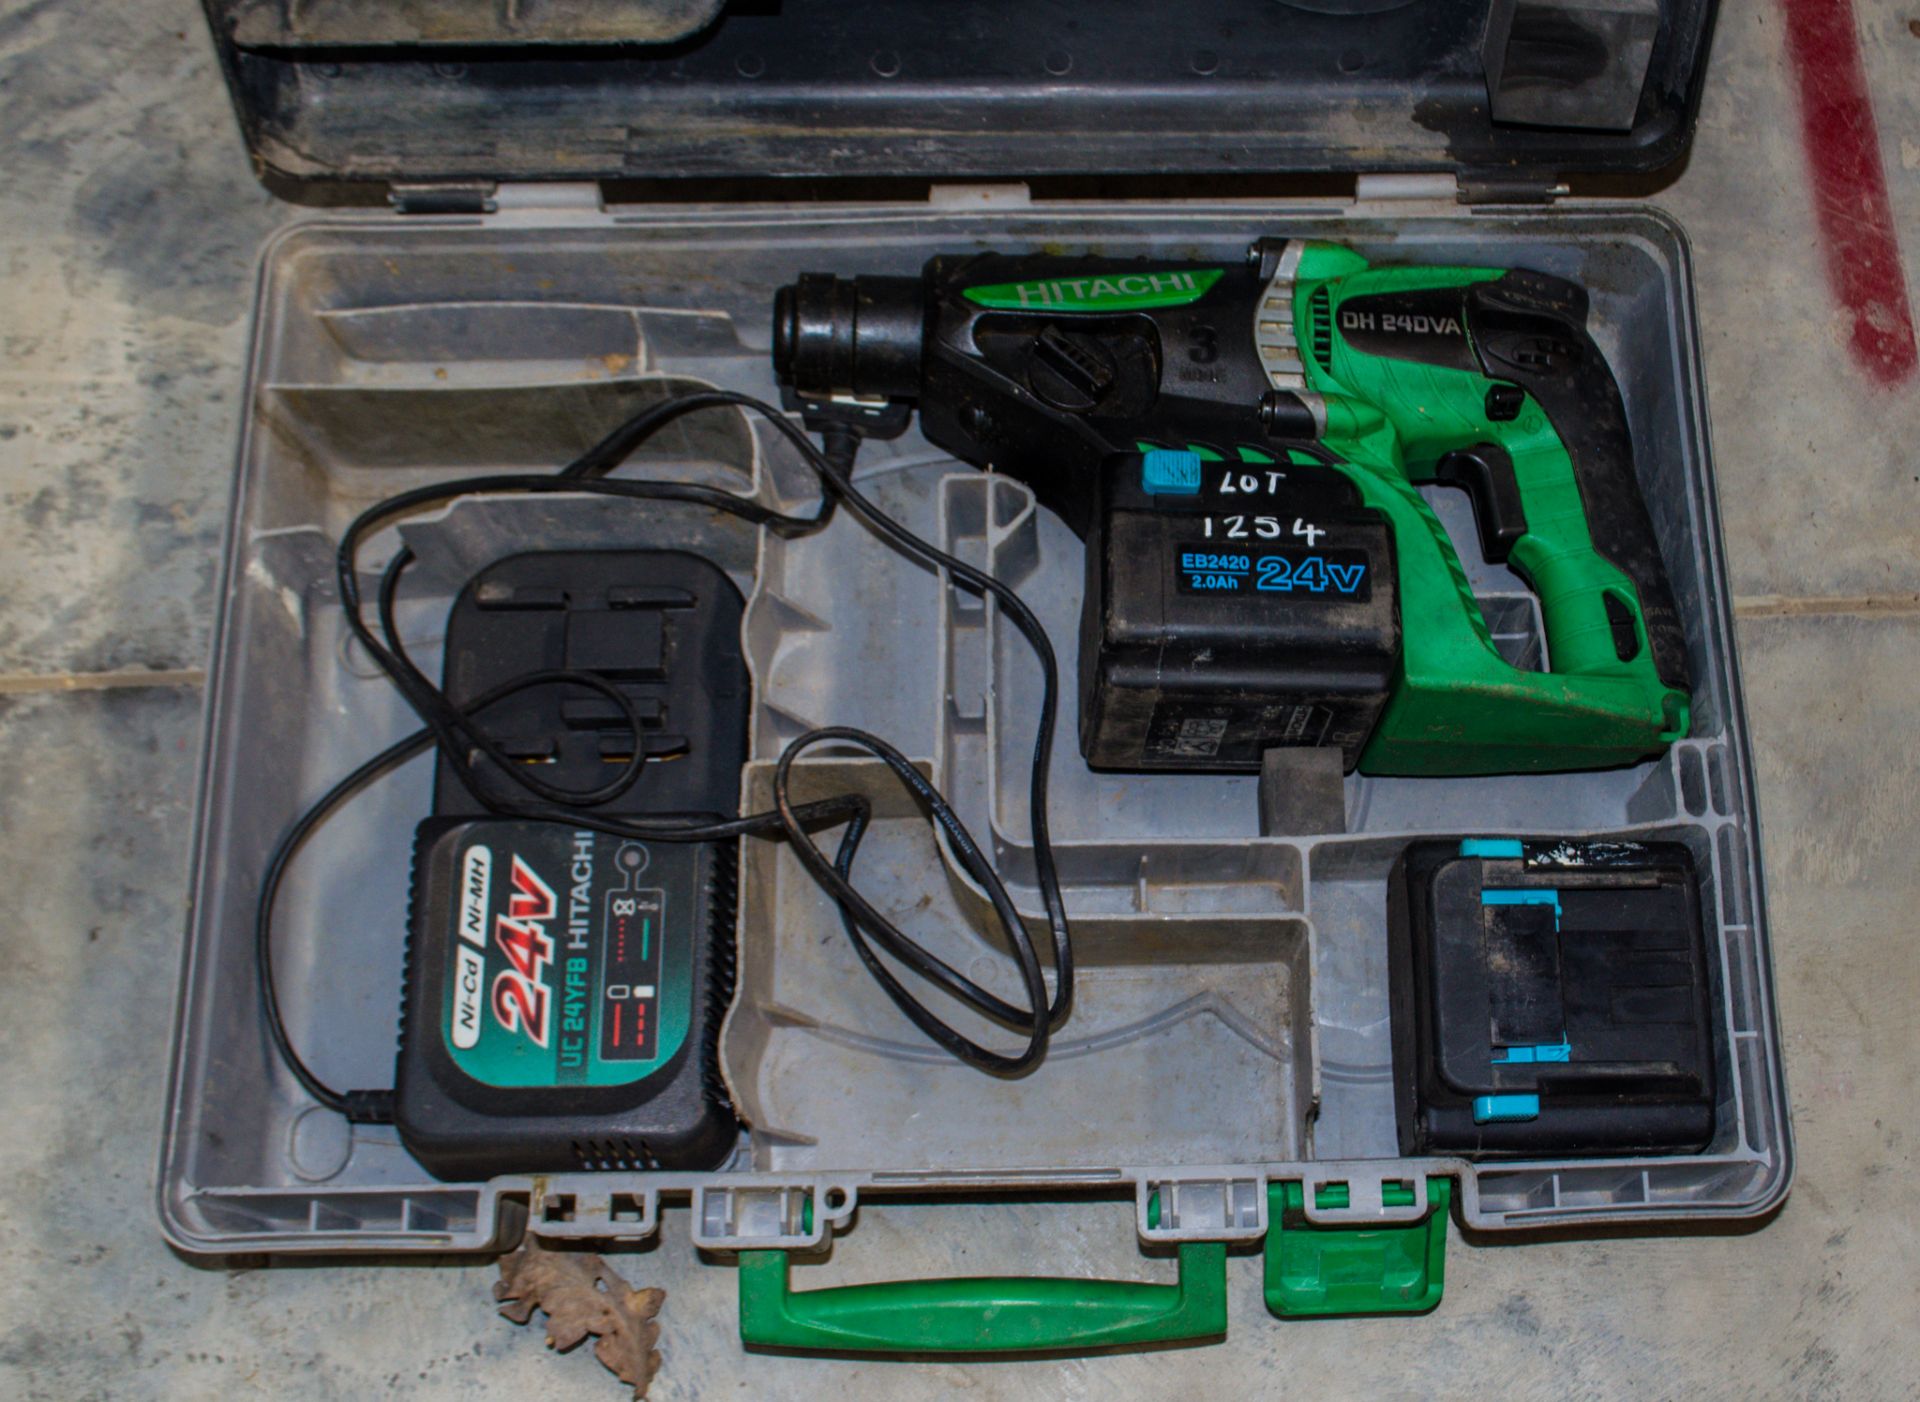 Hitachi DH240VA 24v cordless SDS rotary hammer drill c/w 2 batteries, charger and carry case